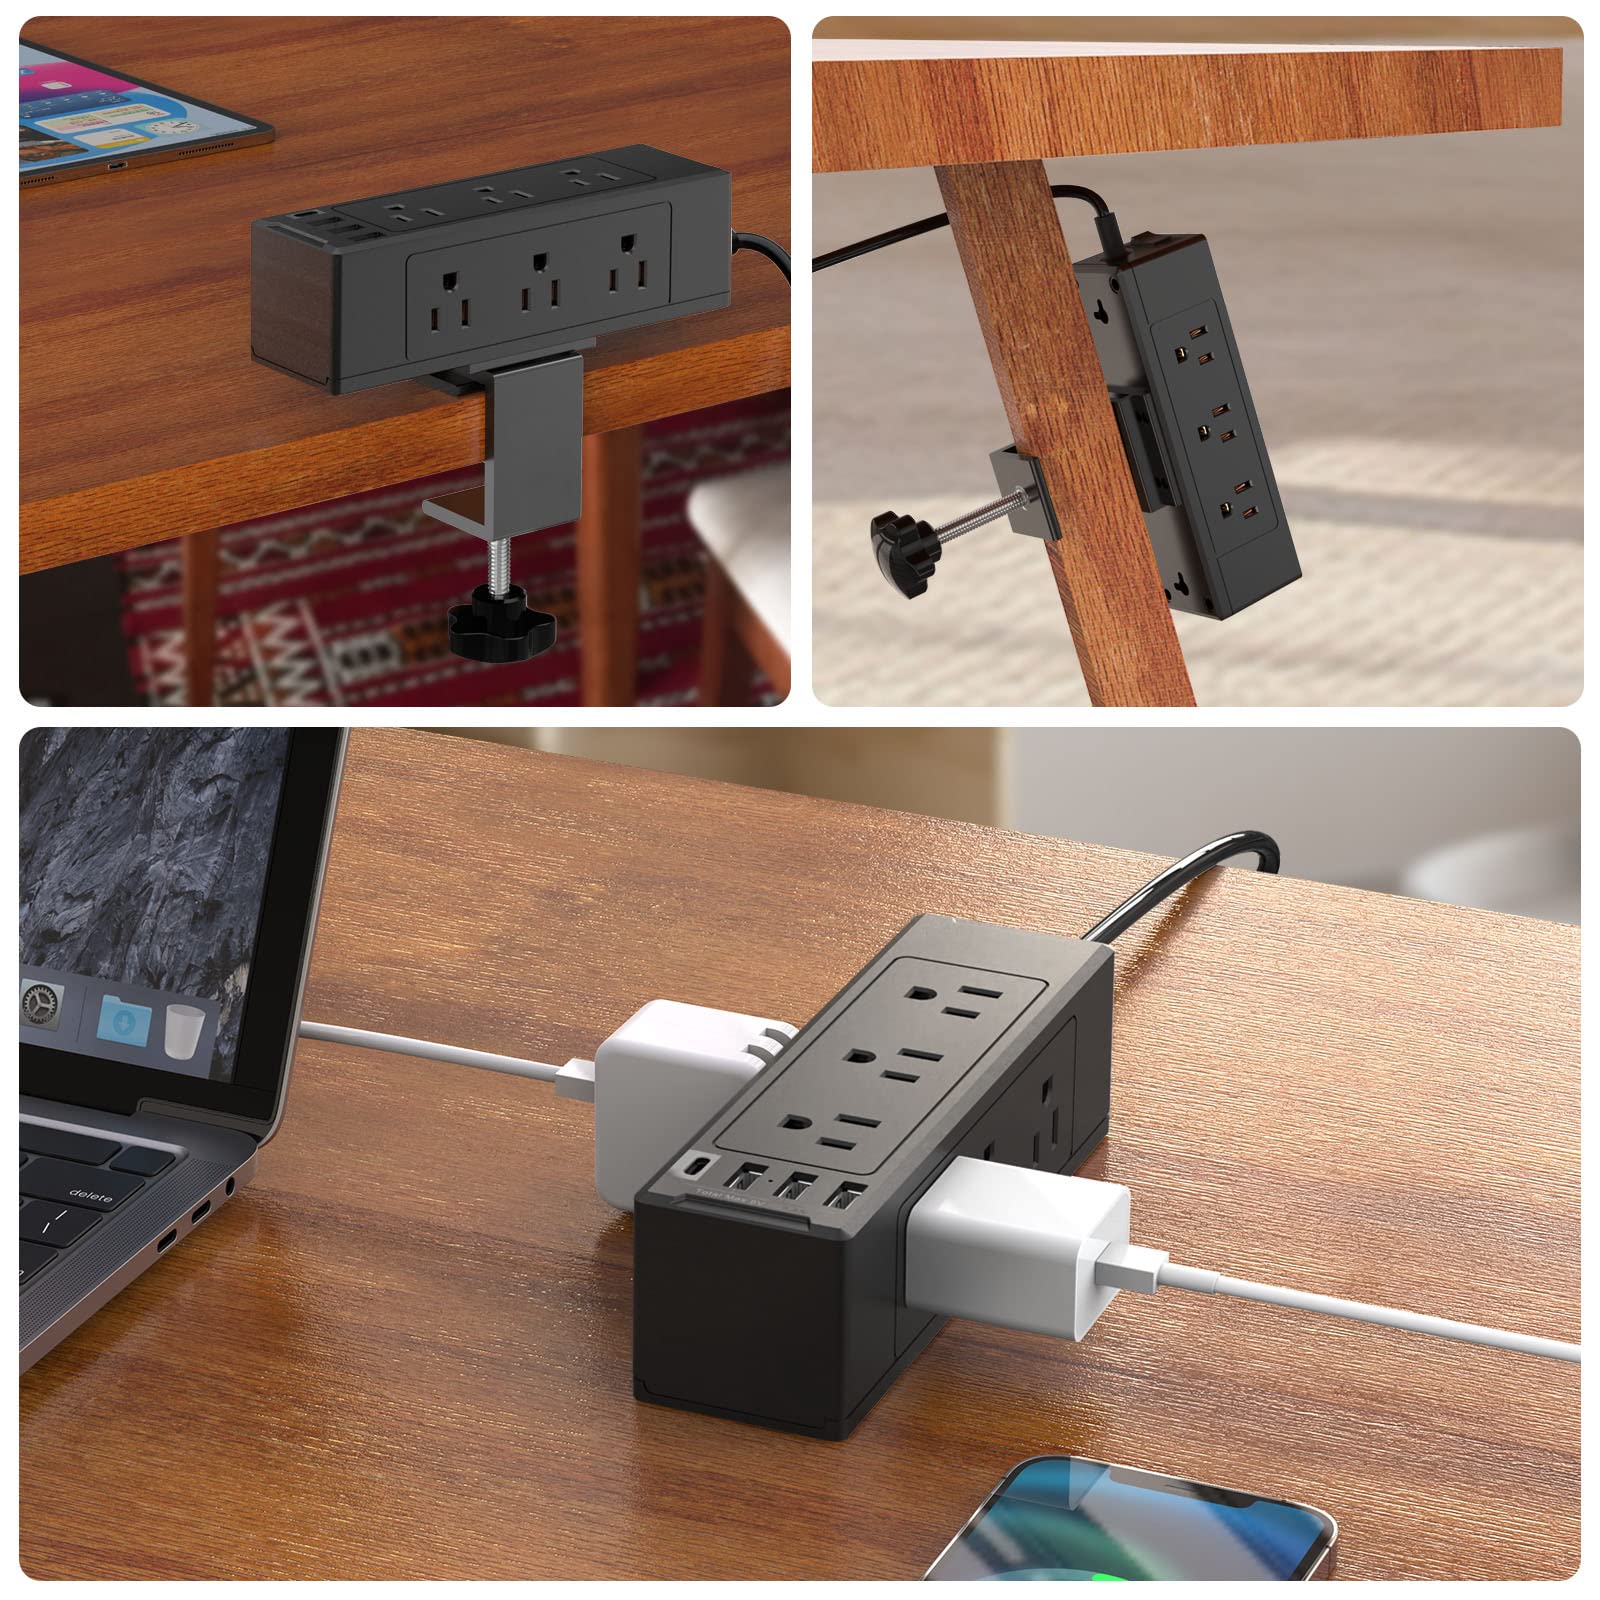 QBA Desk Clamp Power Strip with USB C, 9 Widely Spaced Outlets with 4 USB Ports, 3 Side Outlet Extender with 6FT Extension Cord, Desk USB Charging Station for Home Office Dorm, Black